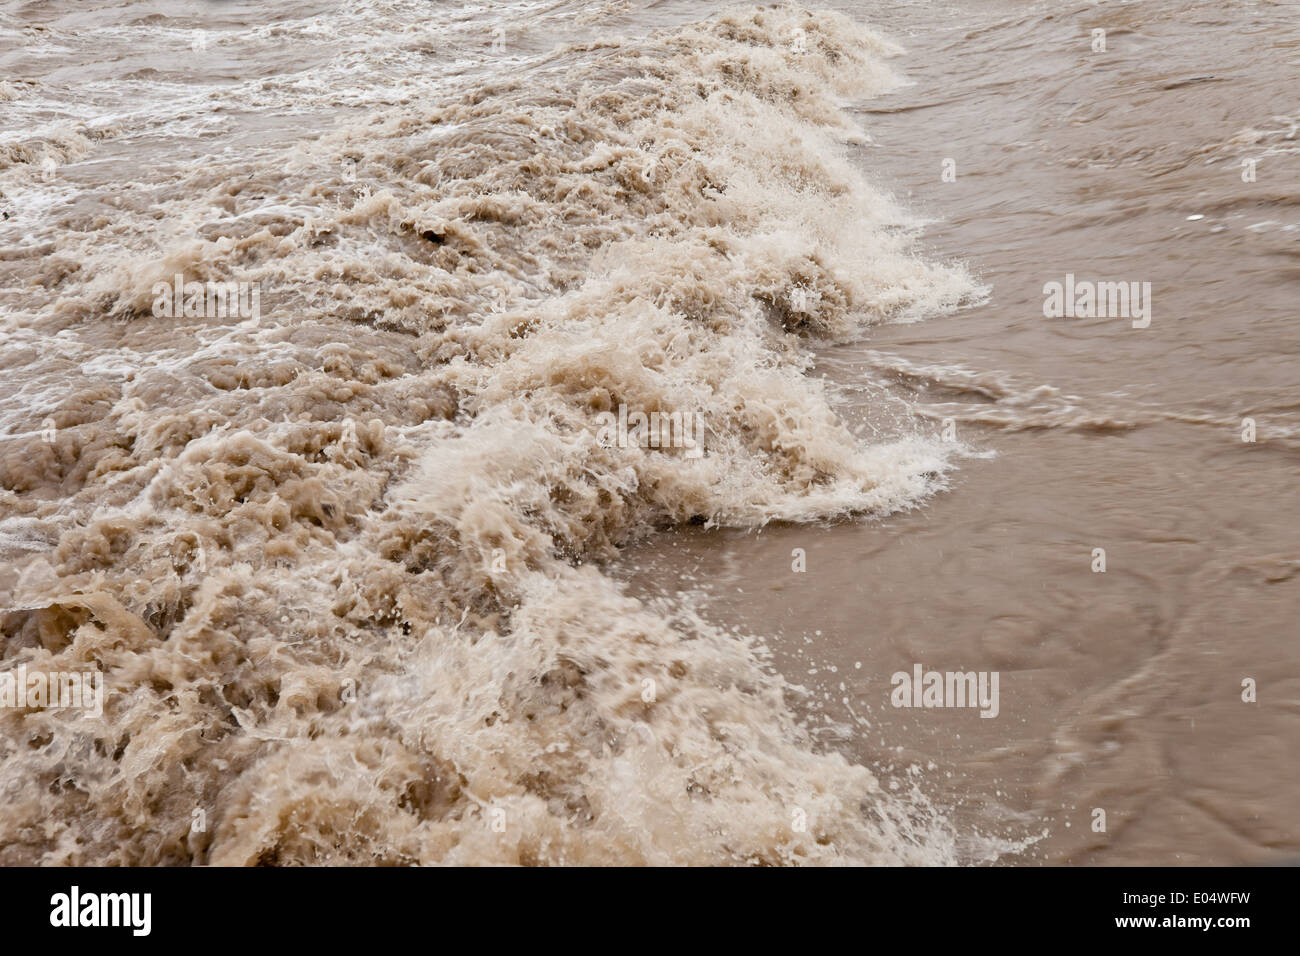 High water Kathastrophen climate climate change Natiurereignis nature natural power natural disasters rains rain weather bad wea Stock Photo